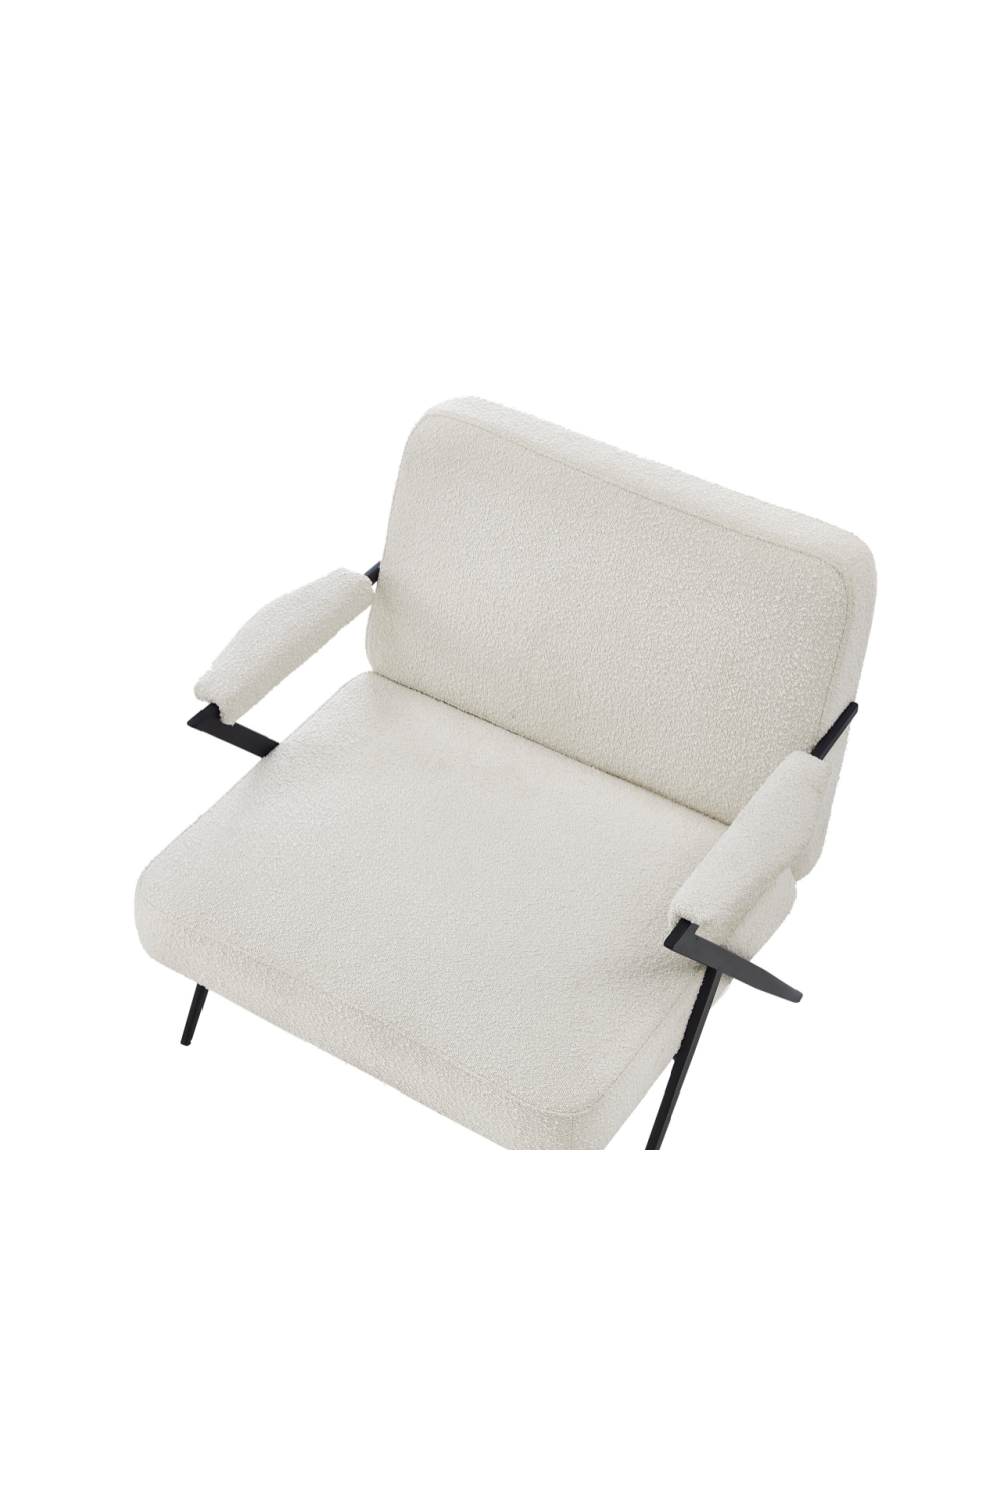 Industrial Style Occasional Chair | Liang & Eimil Ponti | Oroa.com